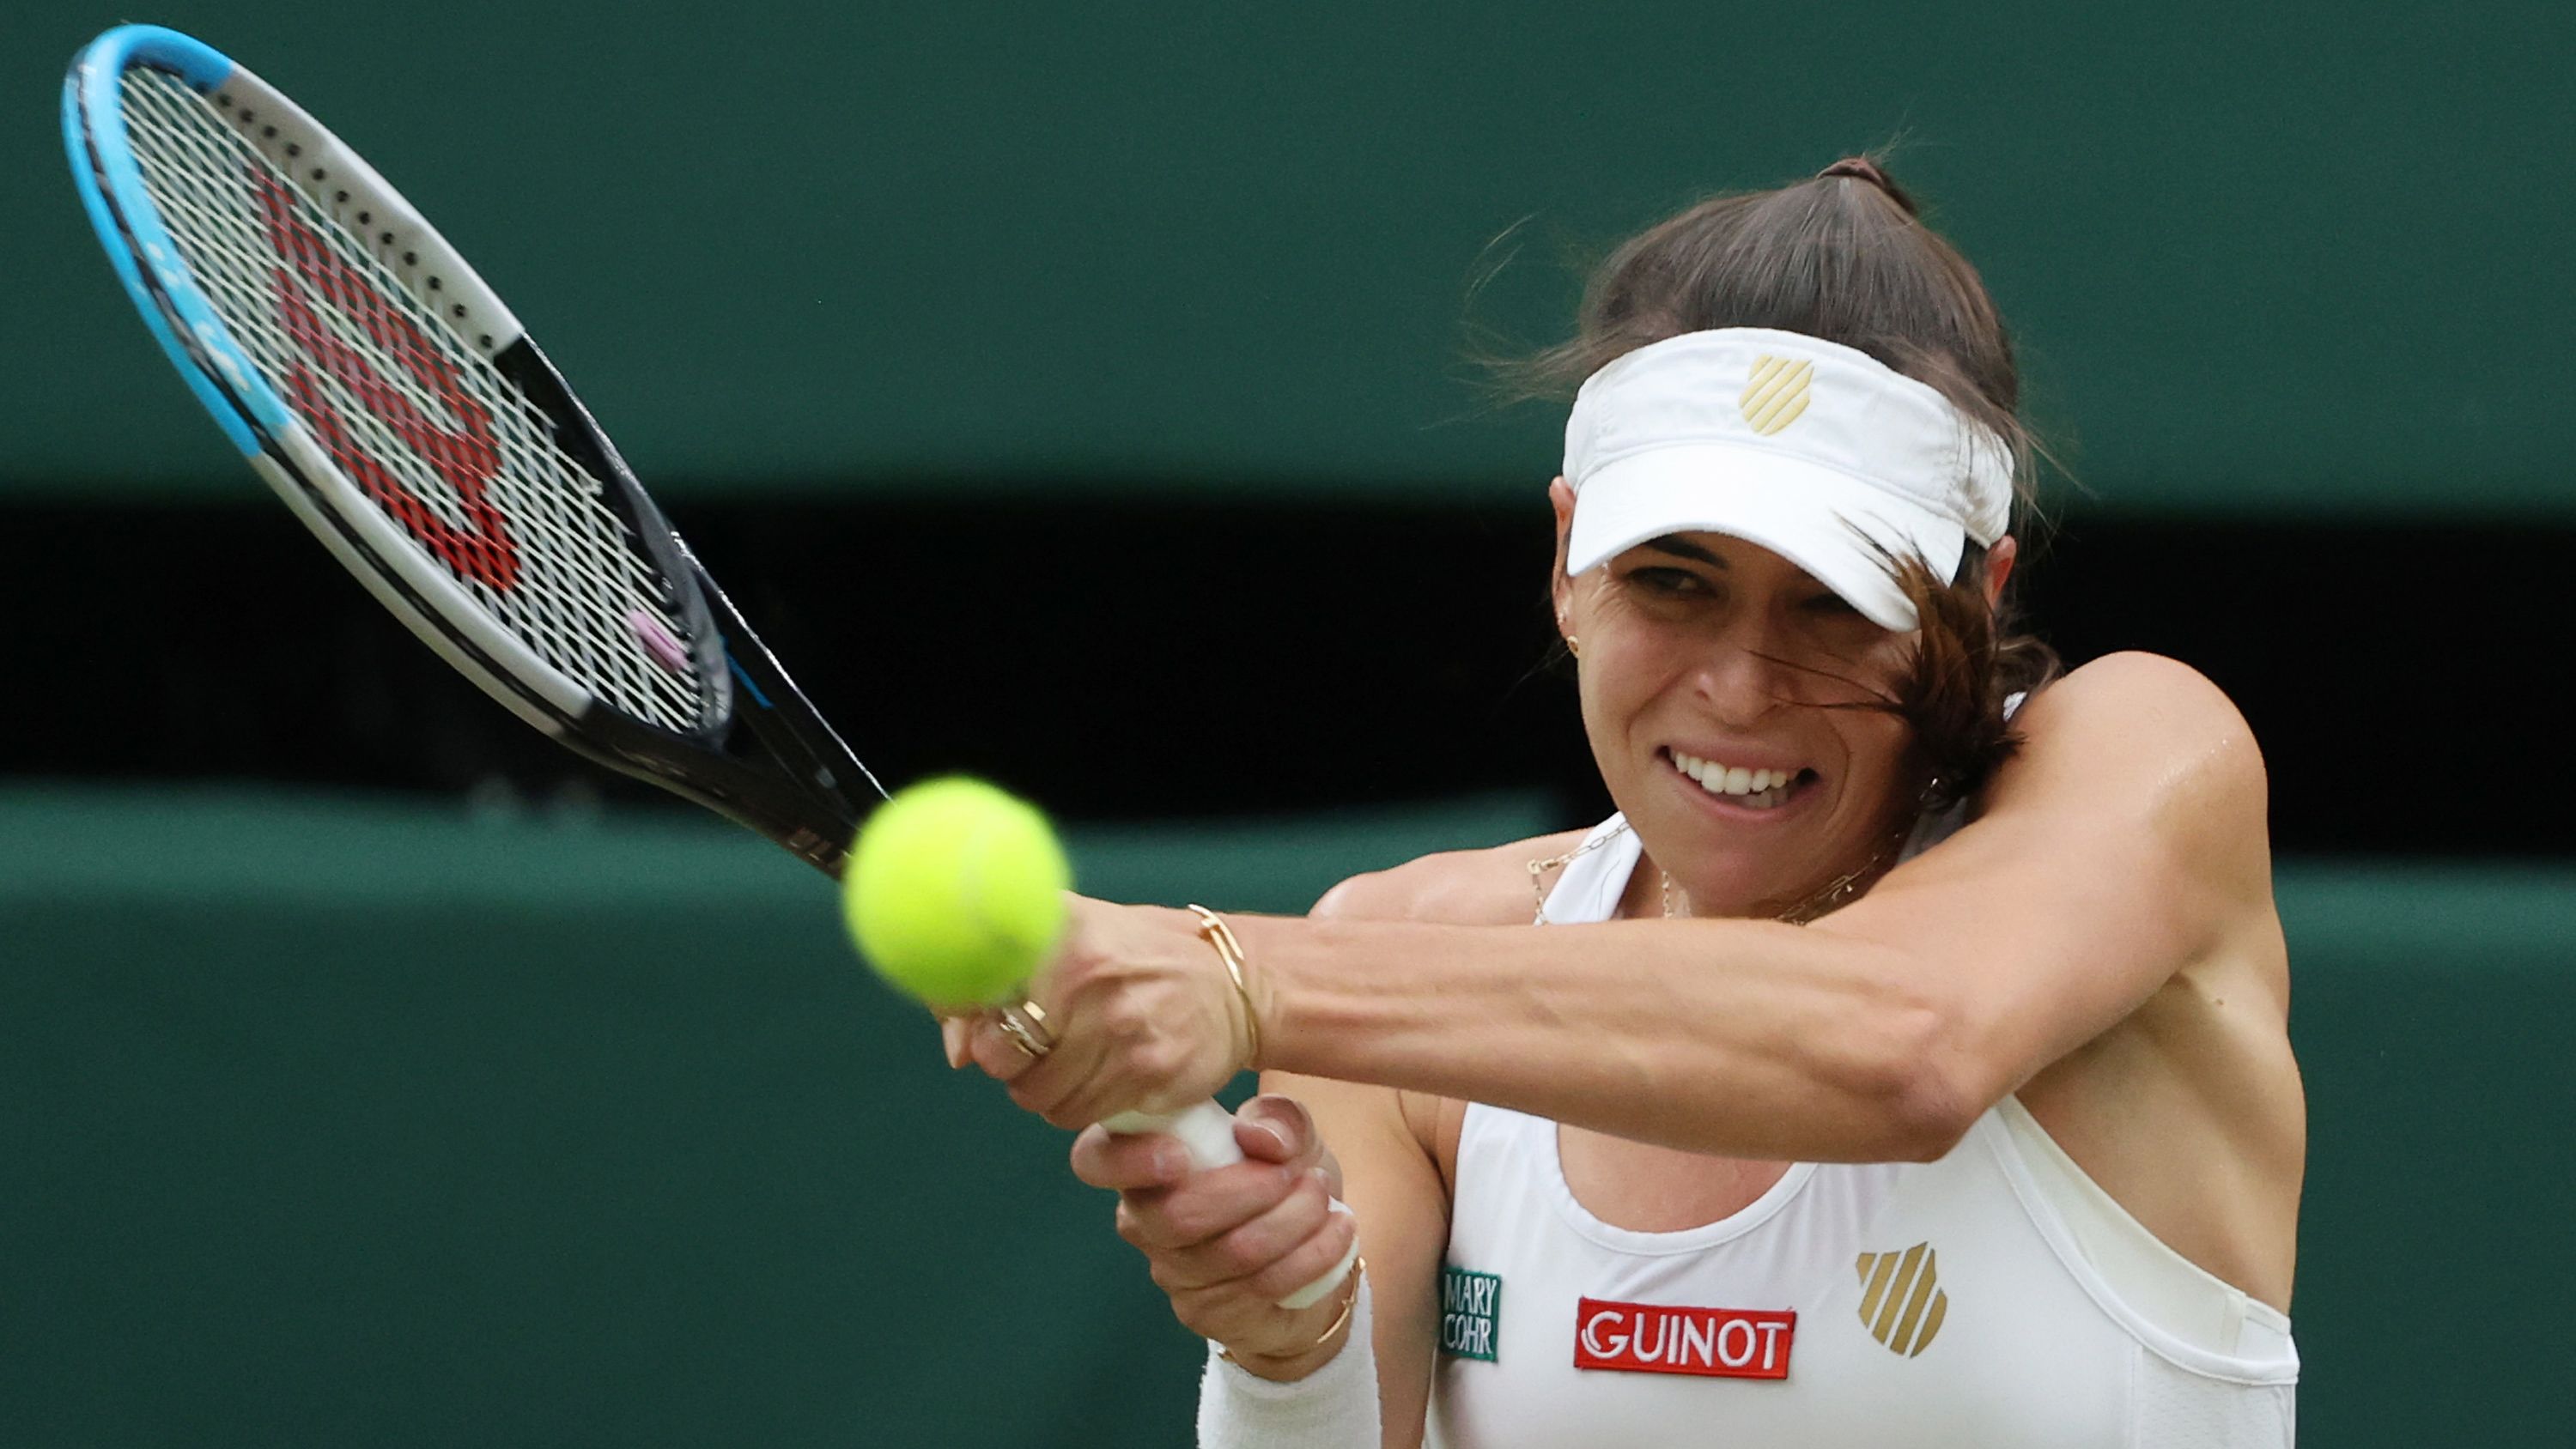 Casey Dellacqua reveals how Wimbledon points ban will unfairly punish Aussies, including Ajla Tomljanovic